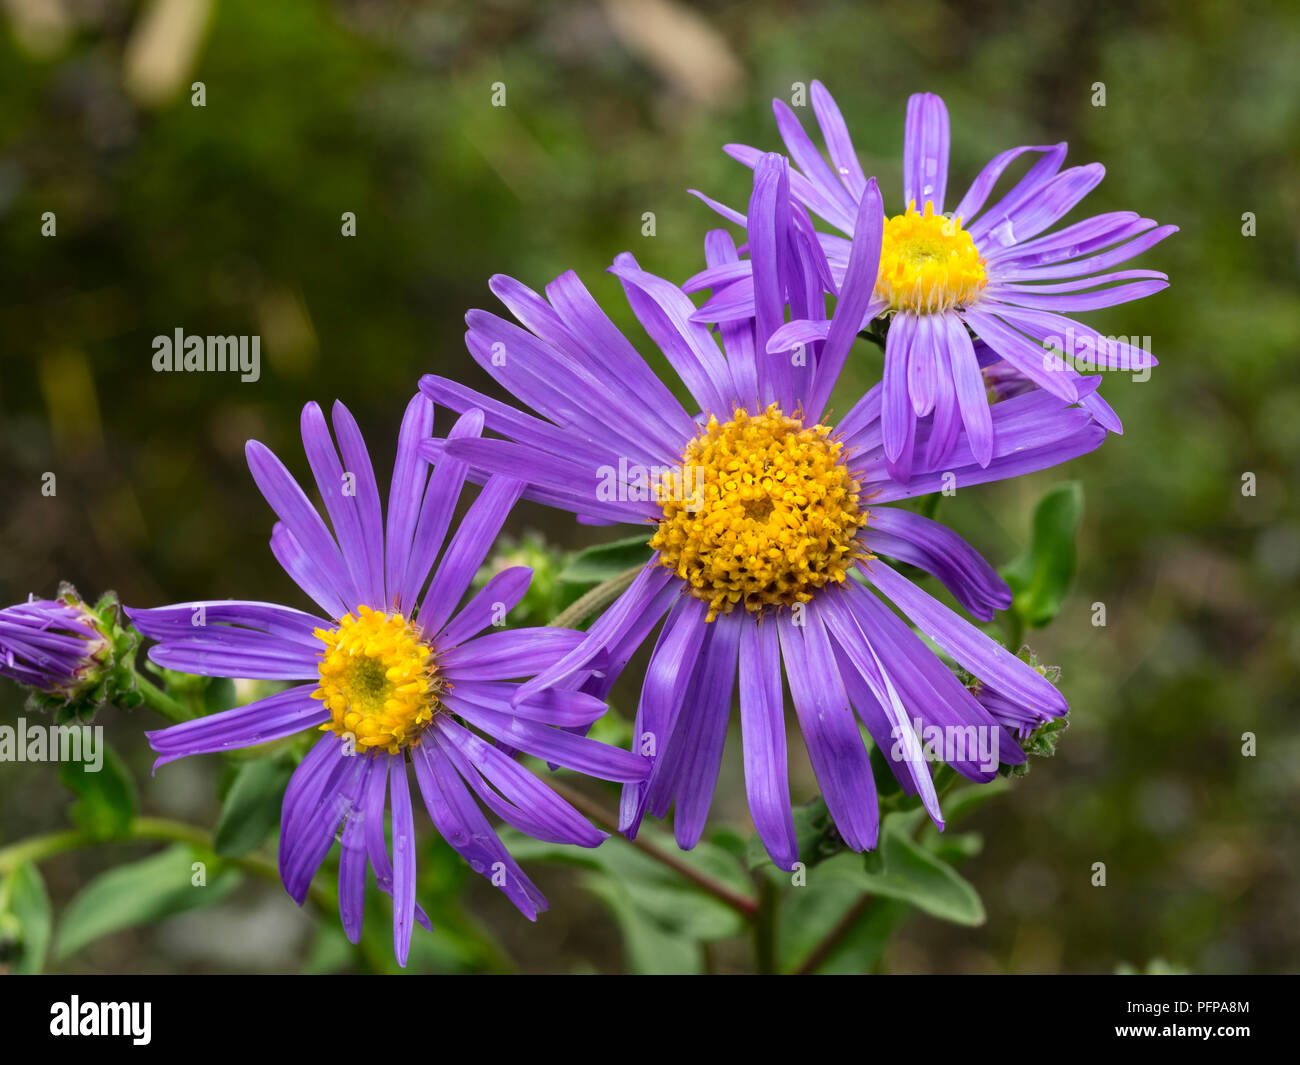 Violet-blue daisy flowers of the late summer blooming Italian aster, Aster amellus 'King George' Stock Photo